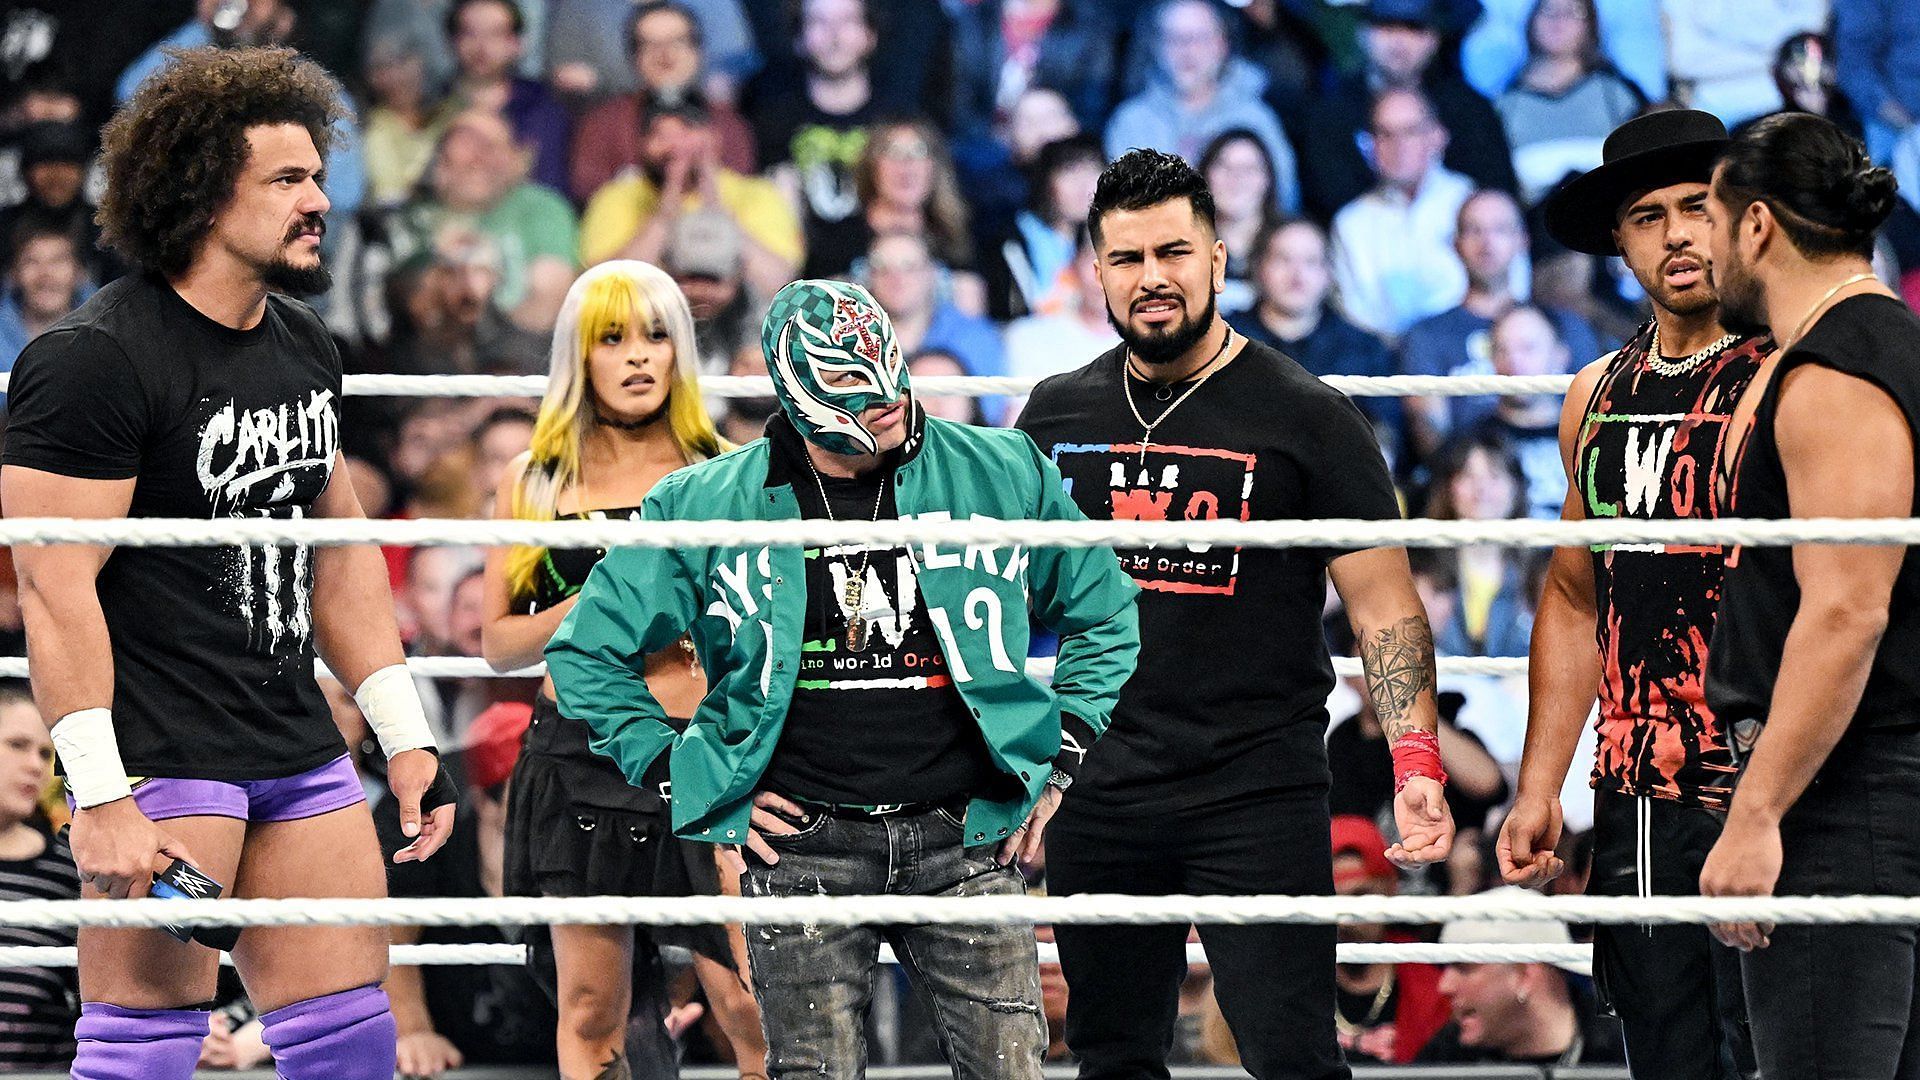 The Latino World Order on SmackDown.